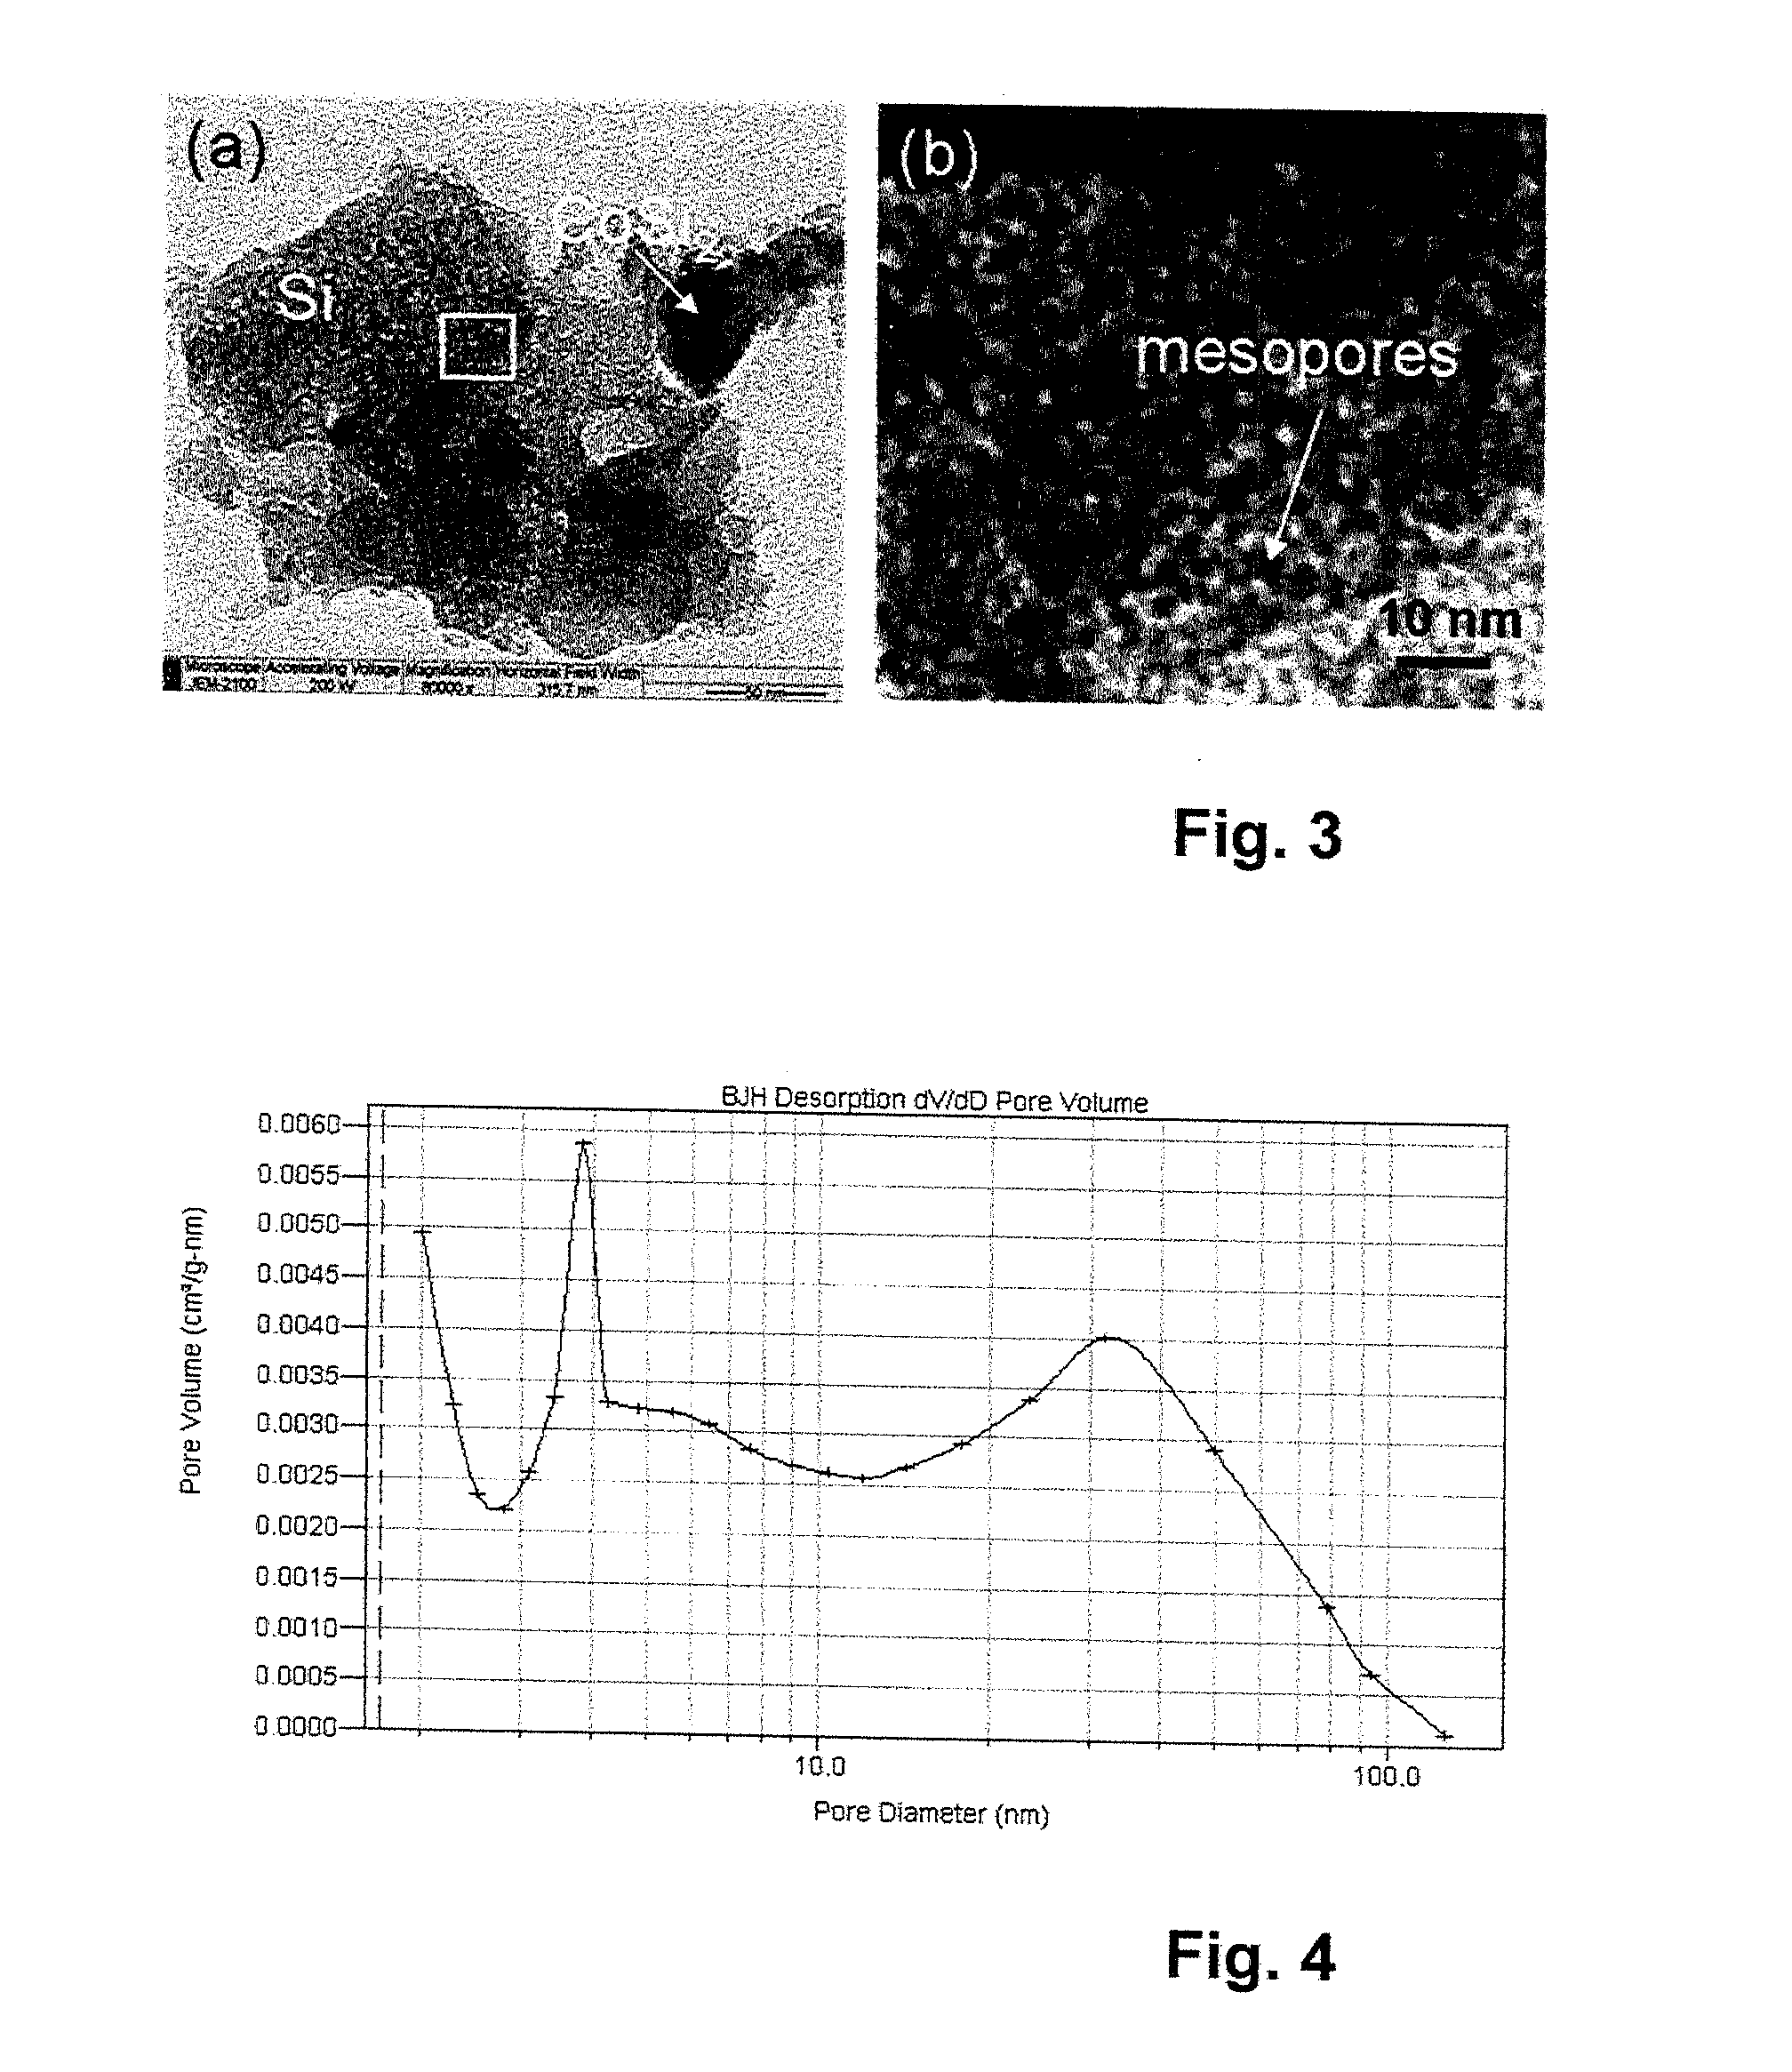 Mesoporous Silicon Compound used as Lithium-Ion Cell Negative Electrode Material and Preparation Method Thereof